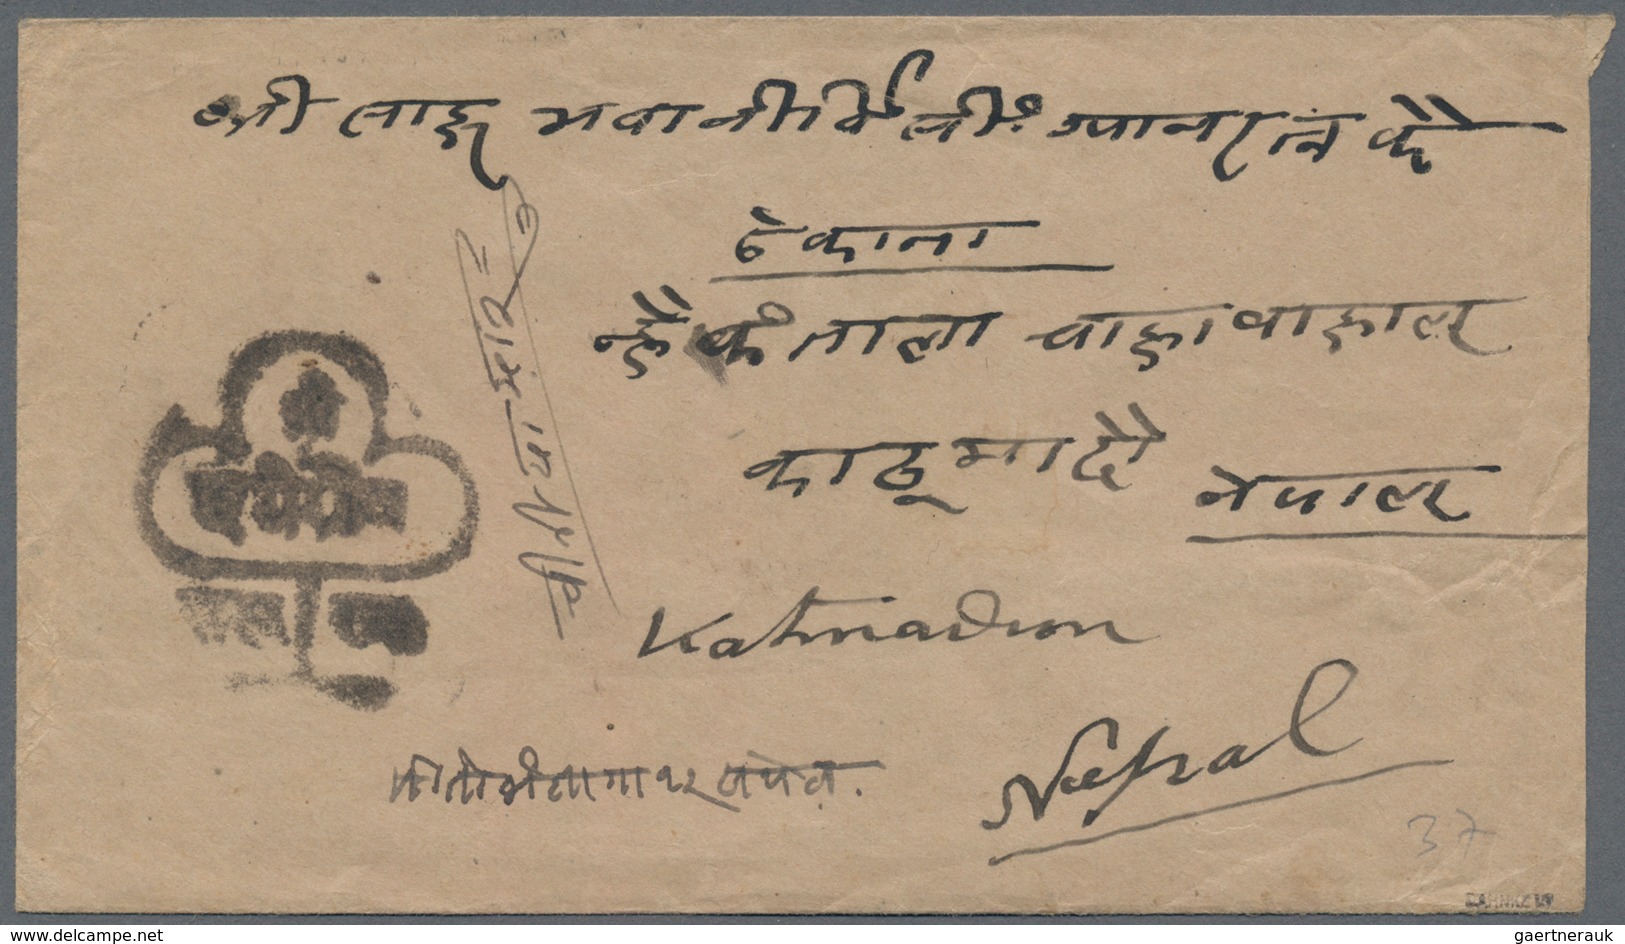 Tibet: 1919/36, India p.o. in Tibet, covers (5) all to Nepal with "Siliguri base office 4 FE 19", ot